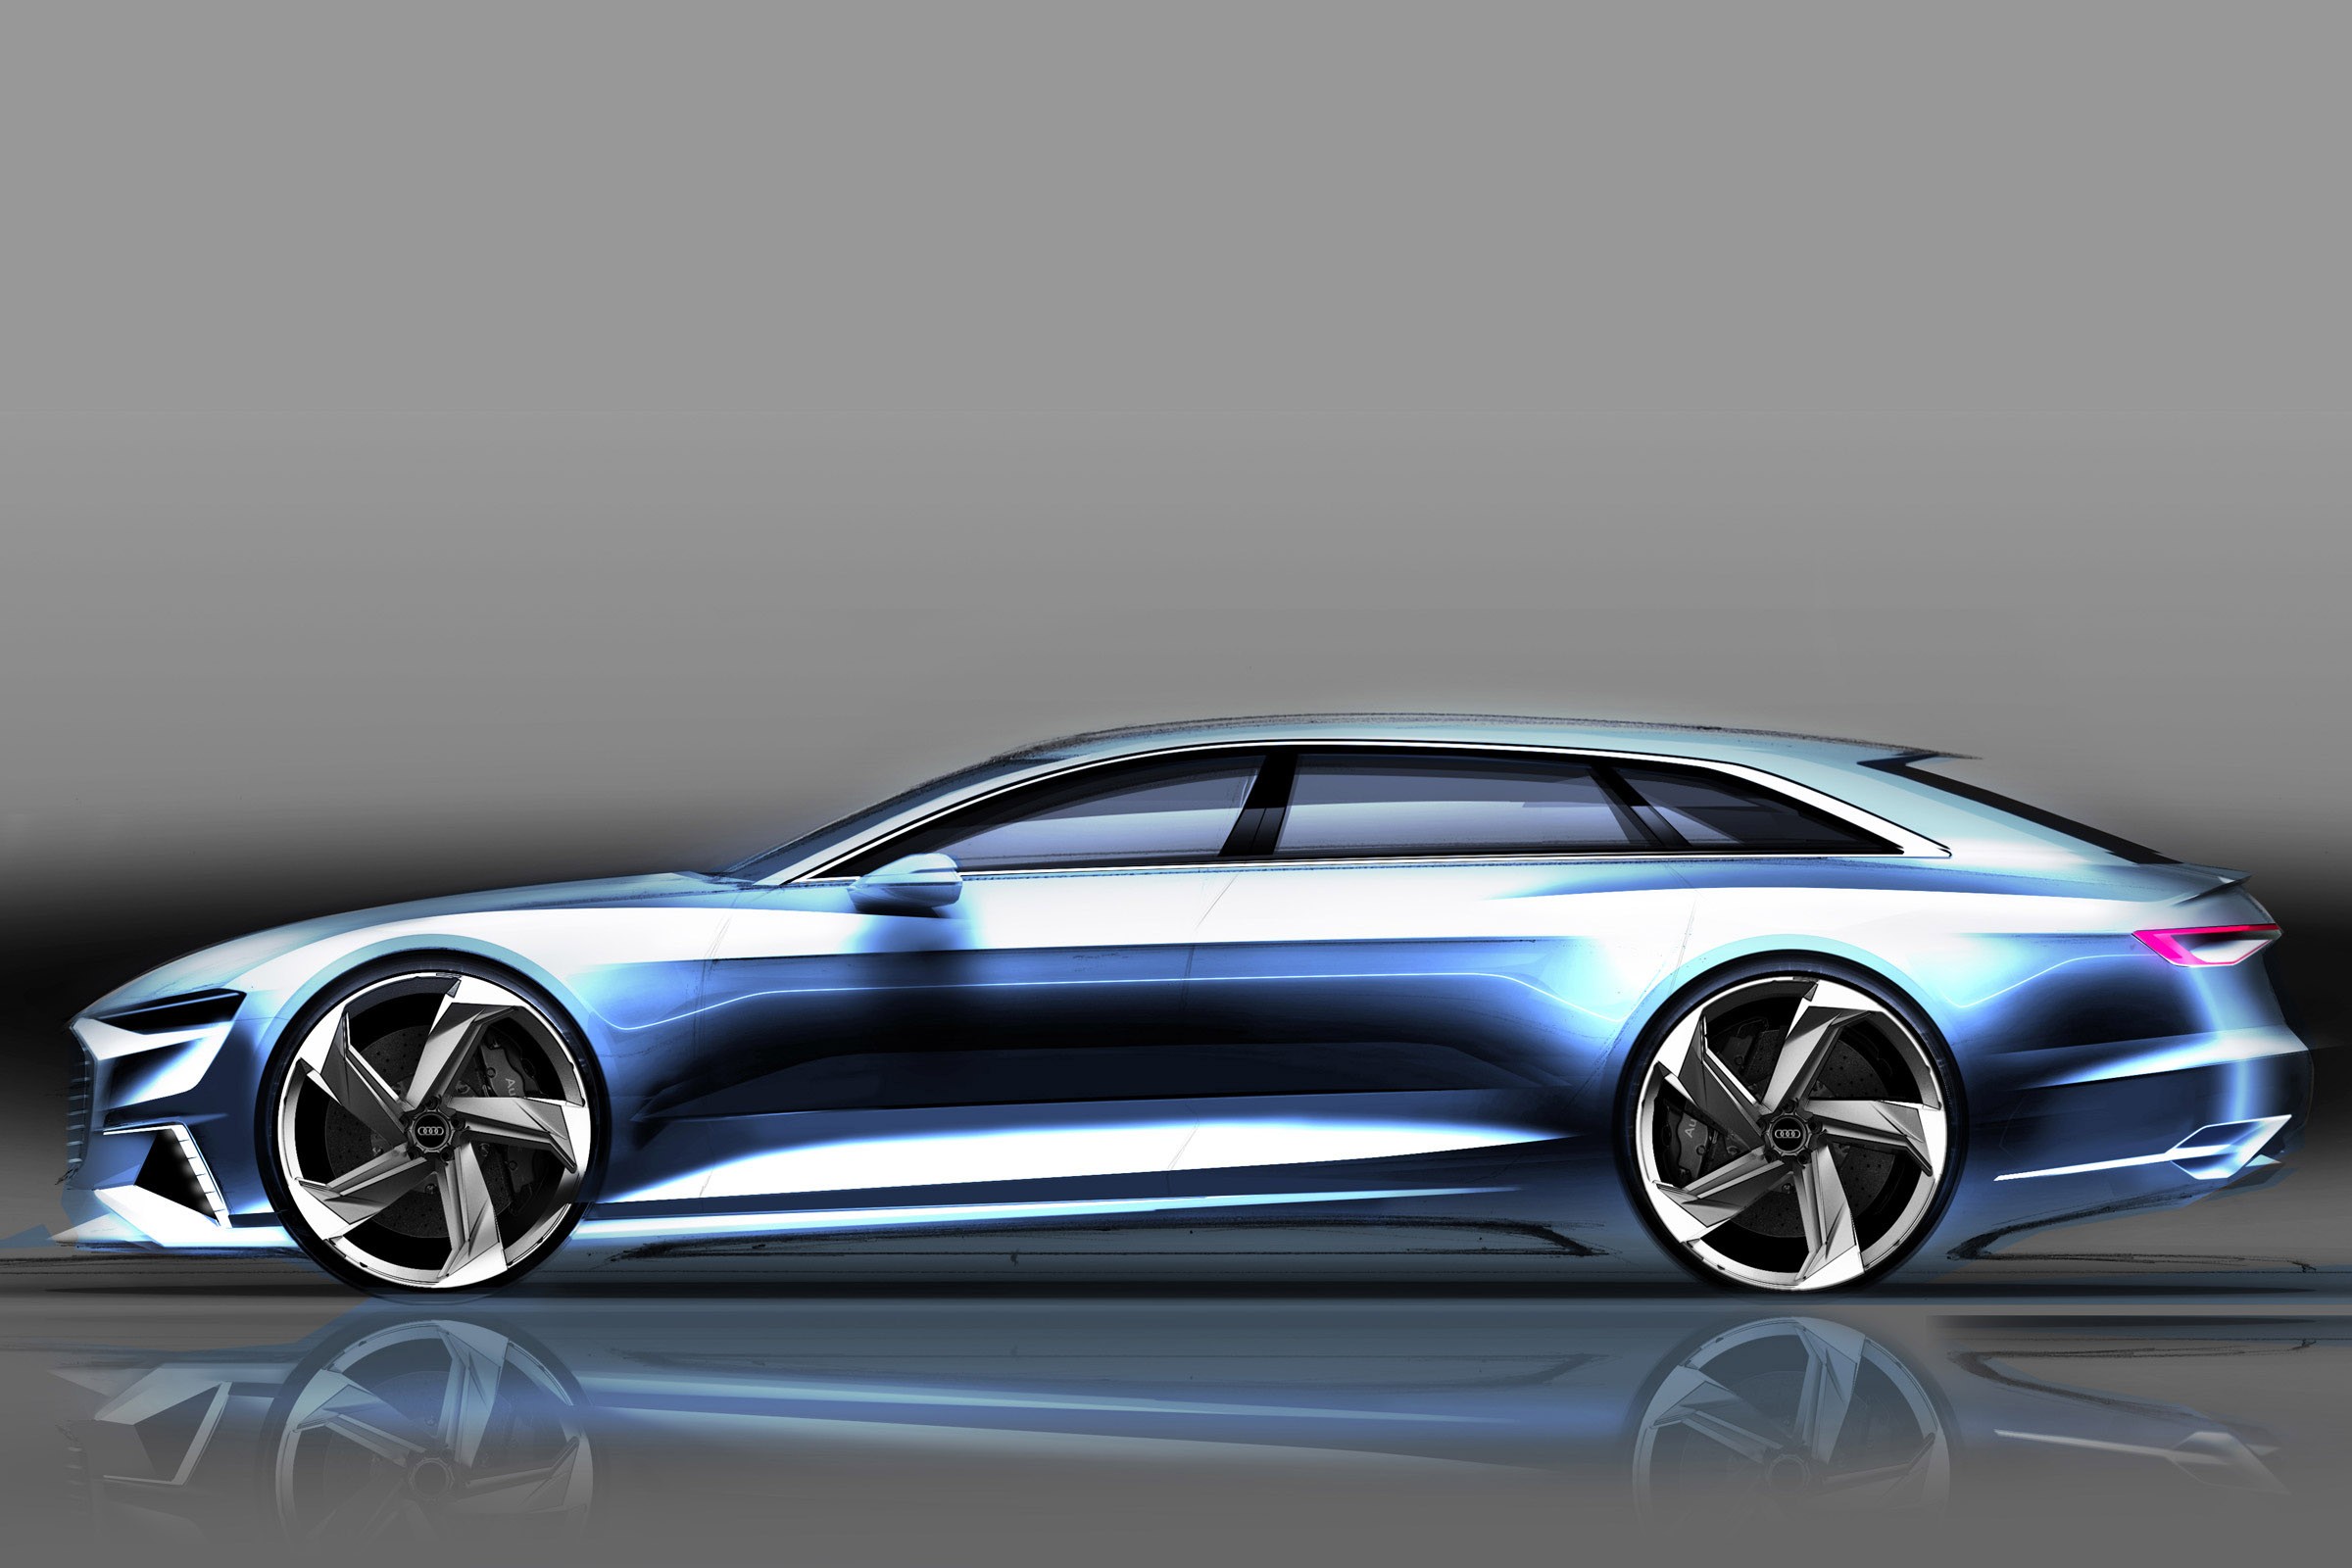 General 2400x1600 vehicle car Audi Audi Prologue sketches concept cars reflection simple background station wagon side view